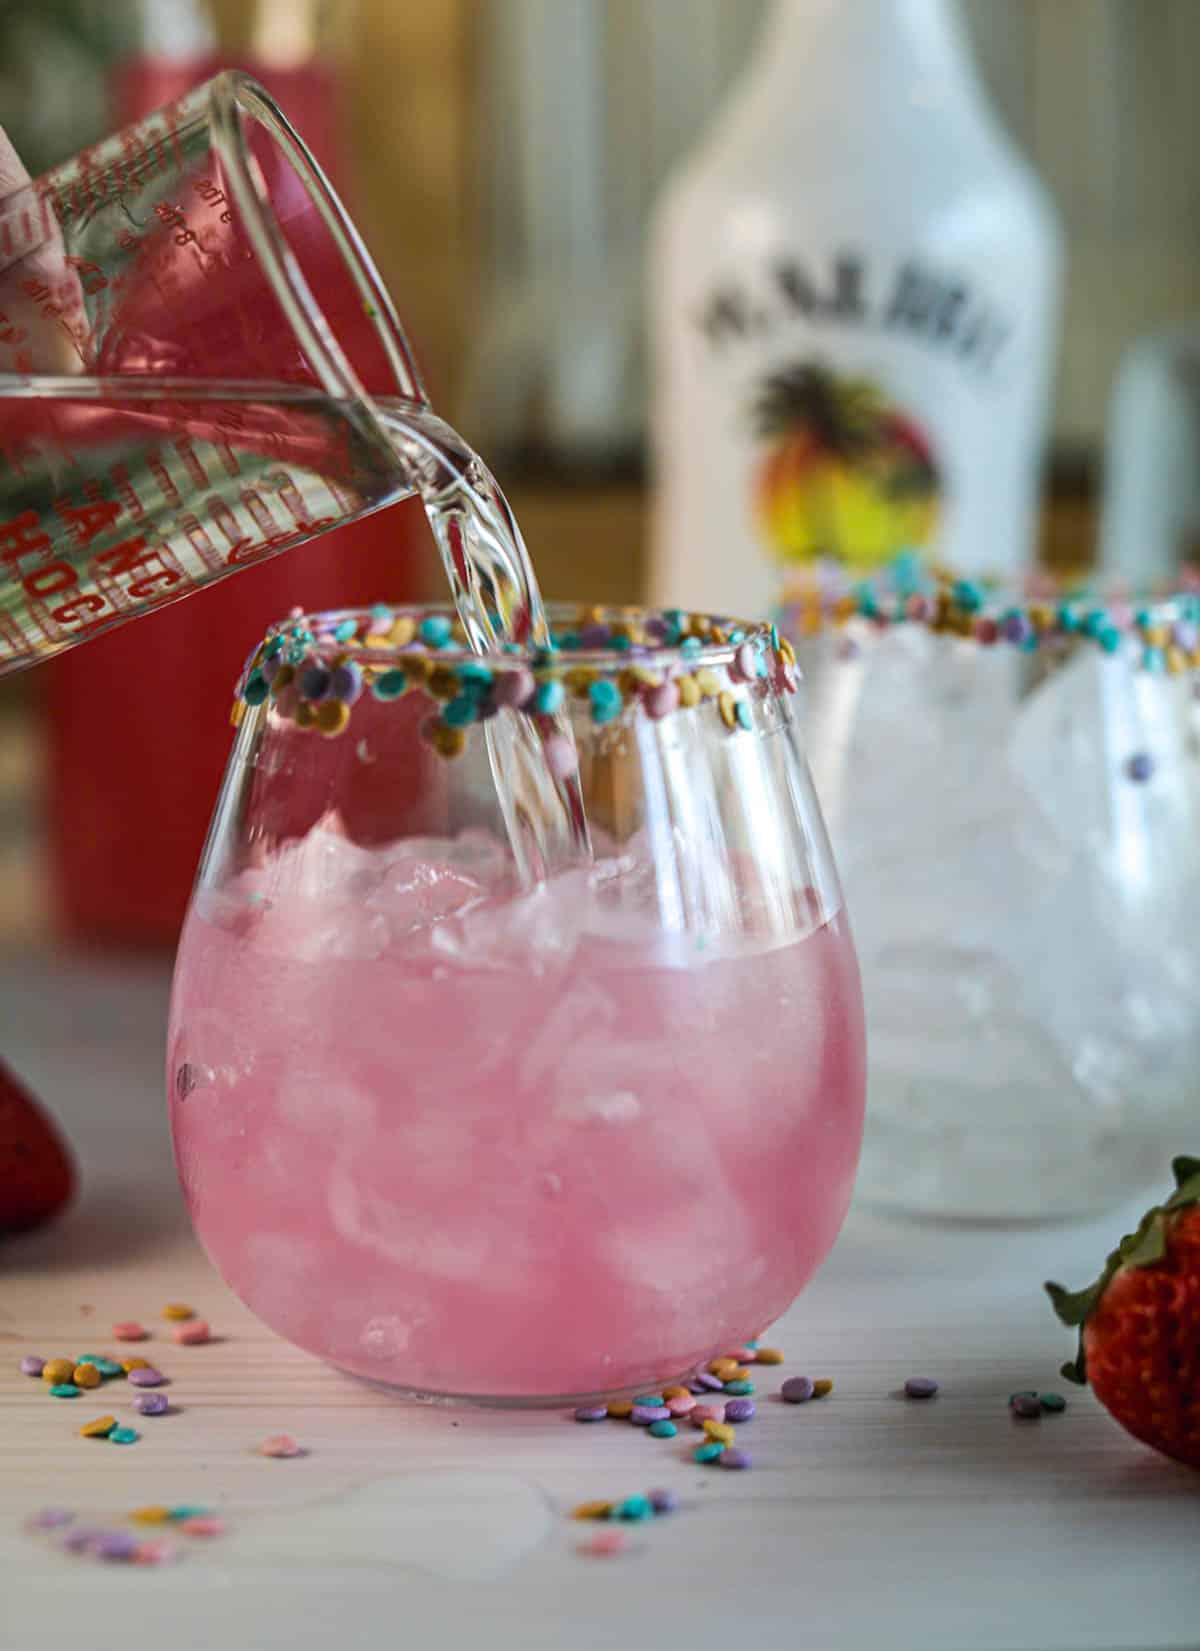 Adding rum into glasses of pink lemonade with sprinkles on rim.